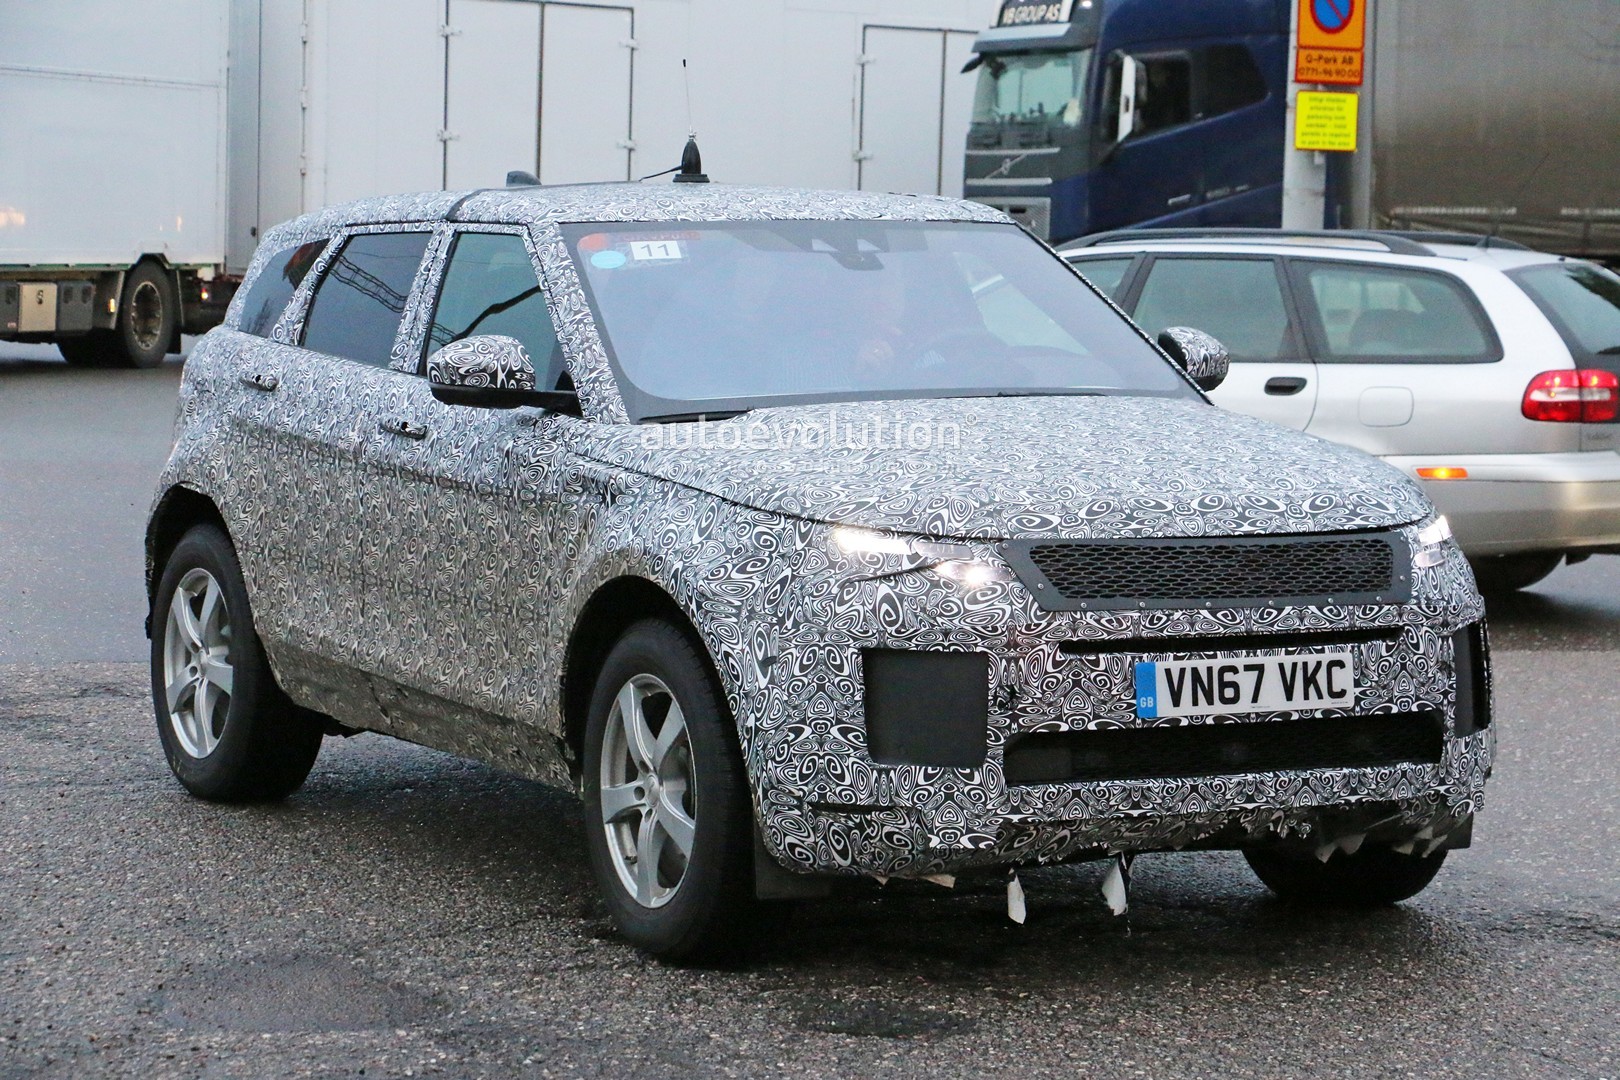 2018 - [Land Rover] Range Rover Evoque II - Page 2 2019-range-rover-evoque-has-scraped-its-camo-most-likely-due-to-off-roading_1